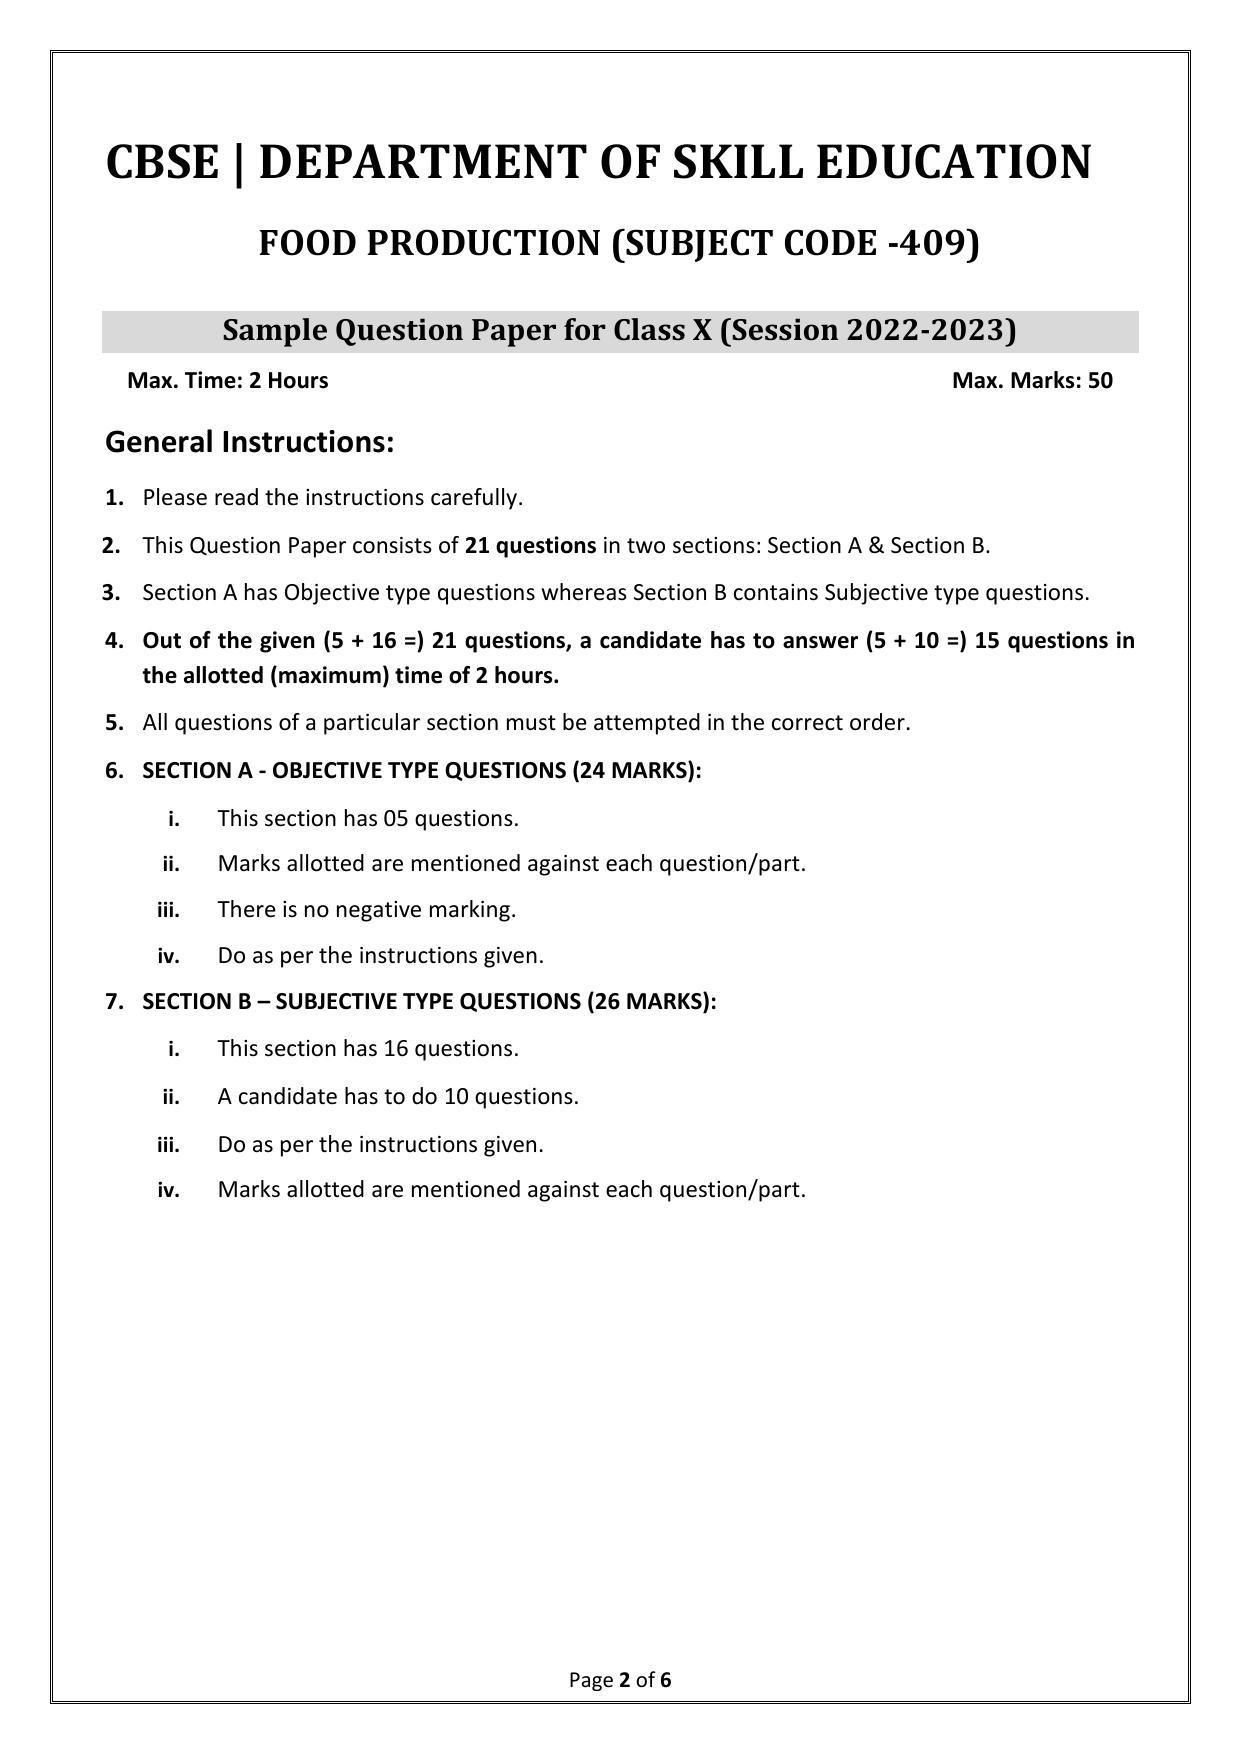 CBSE Class 10 (Skill Education) Food Production Sample Papers 2023 - Page 2